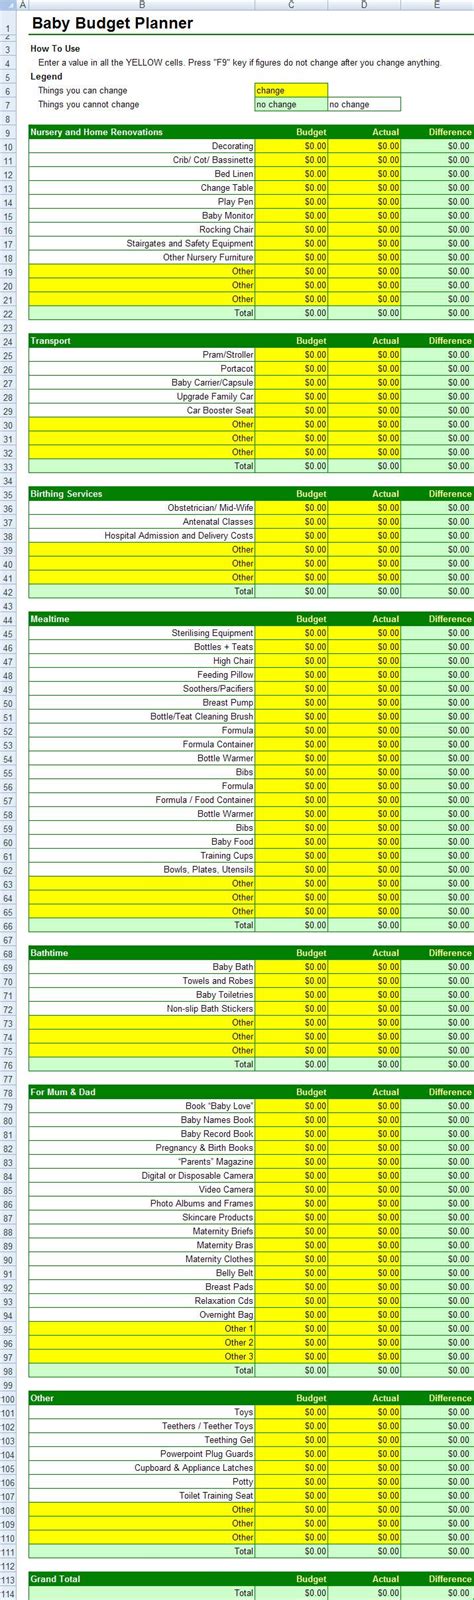 Free Baby Budget Planner Spreadsheet Excel | Baby on a budget, Free baby stuff, Budget planner